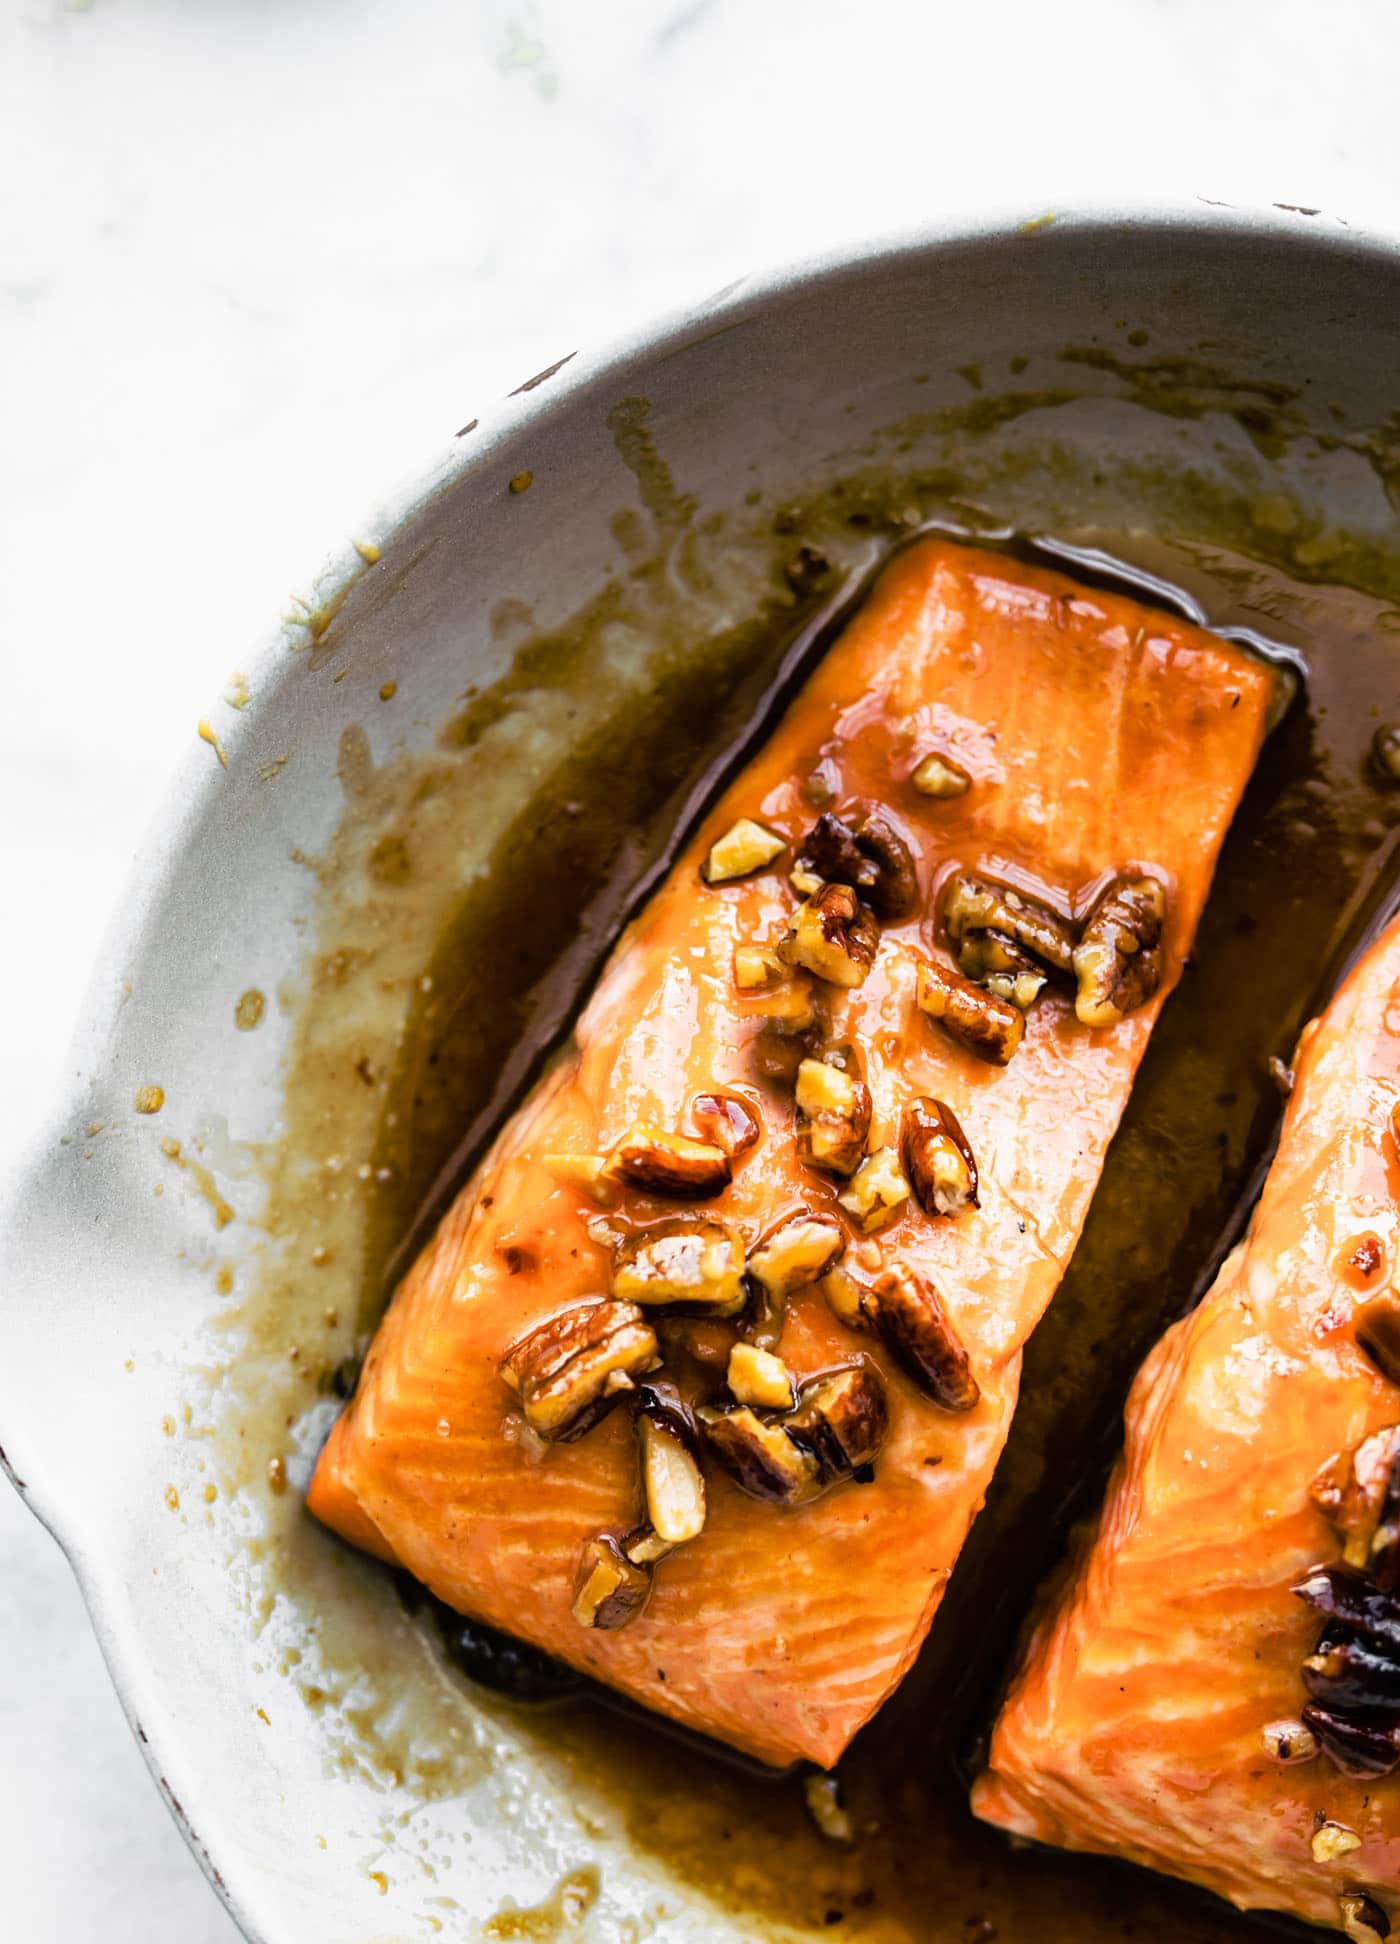 Two salmon filets marinading in a maple bourbon glaze and pecans.